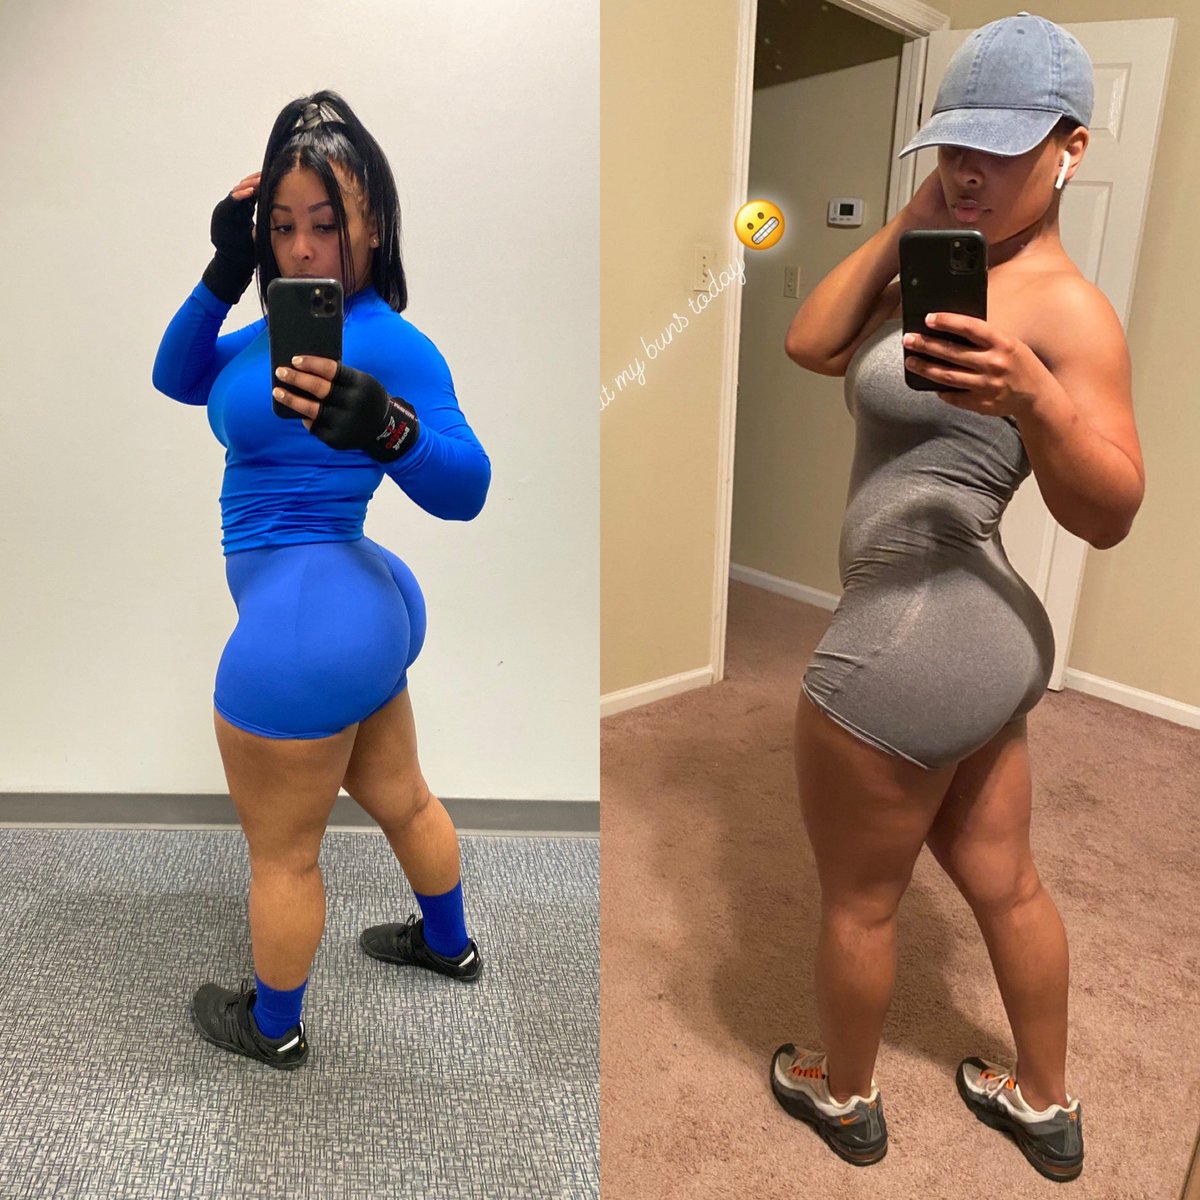 Follow my Instagram: loyaltyisme217_ for gym /home workouts #FitnessGirl #FitnessMotivation #glutes #gains #gym #workoutmotivation #gymoutfits